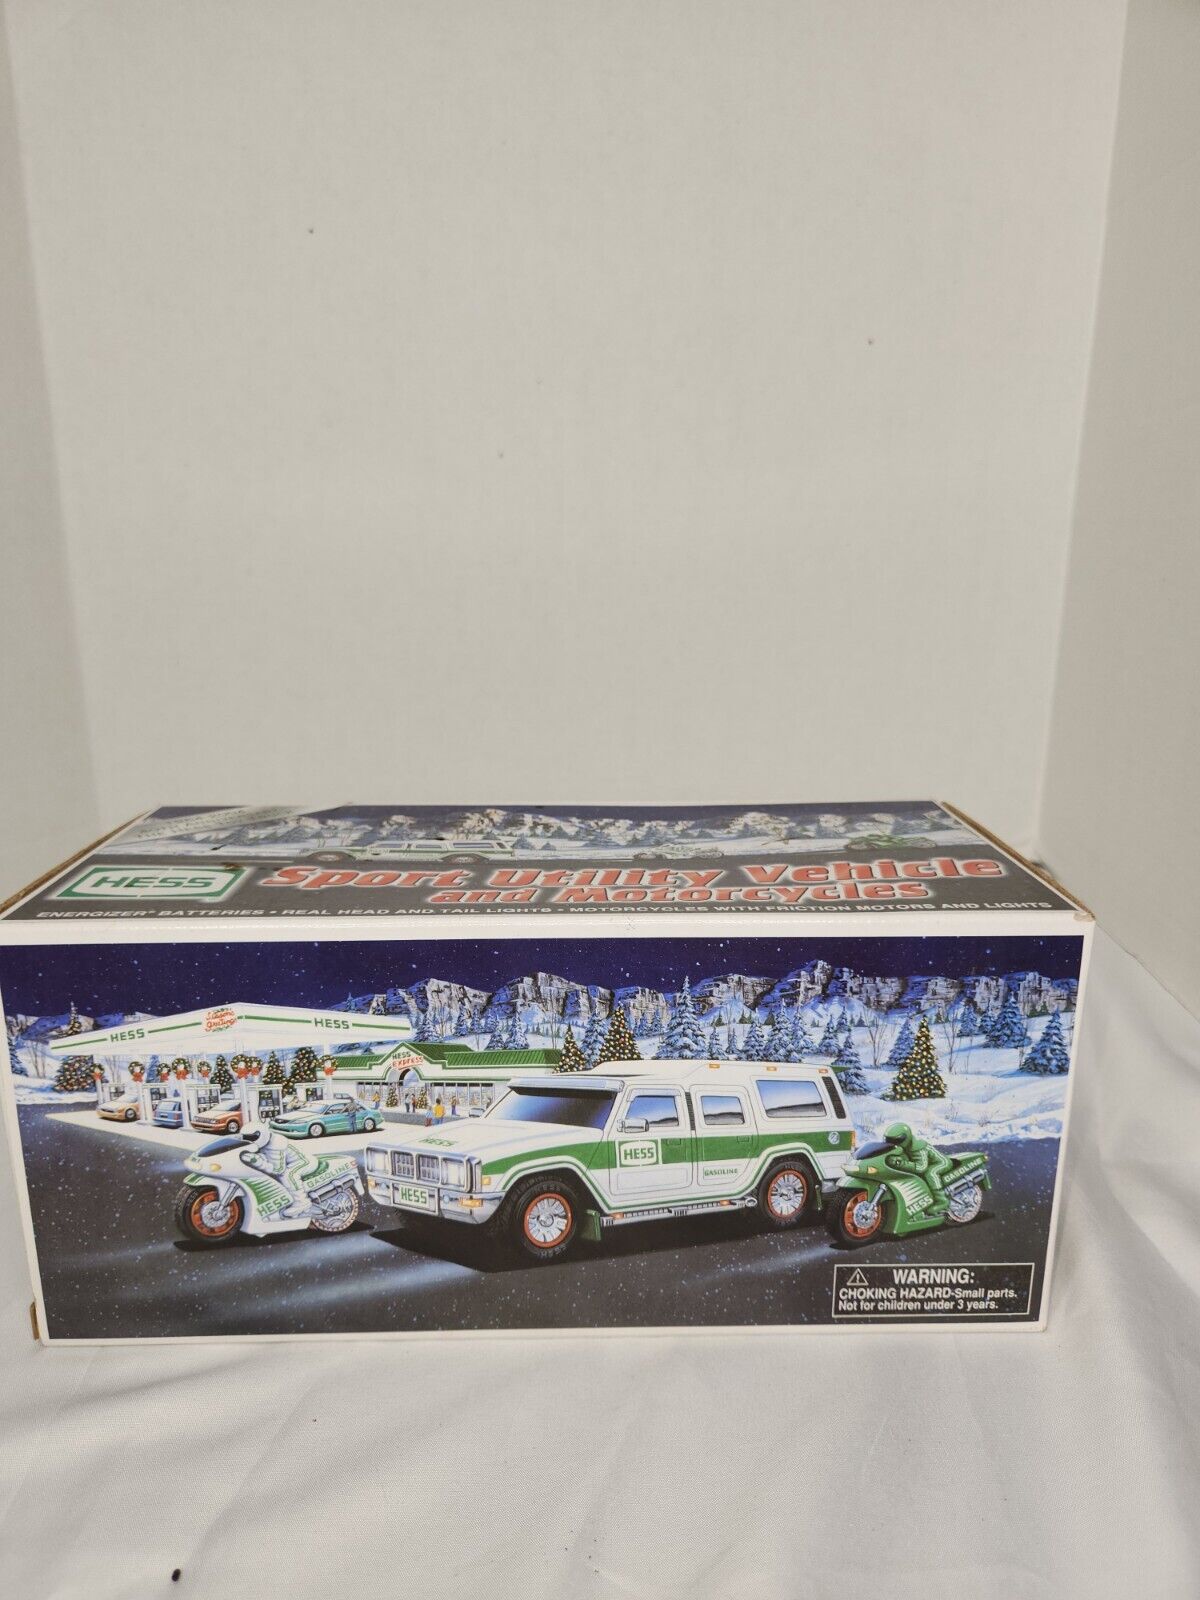 HESS 2004 - 40TH Anniversary Sport Utility Vehicle And Motorcycles Christmas Toy